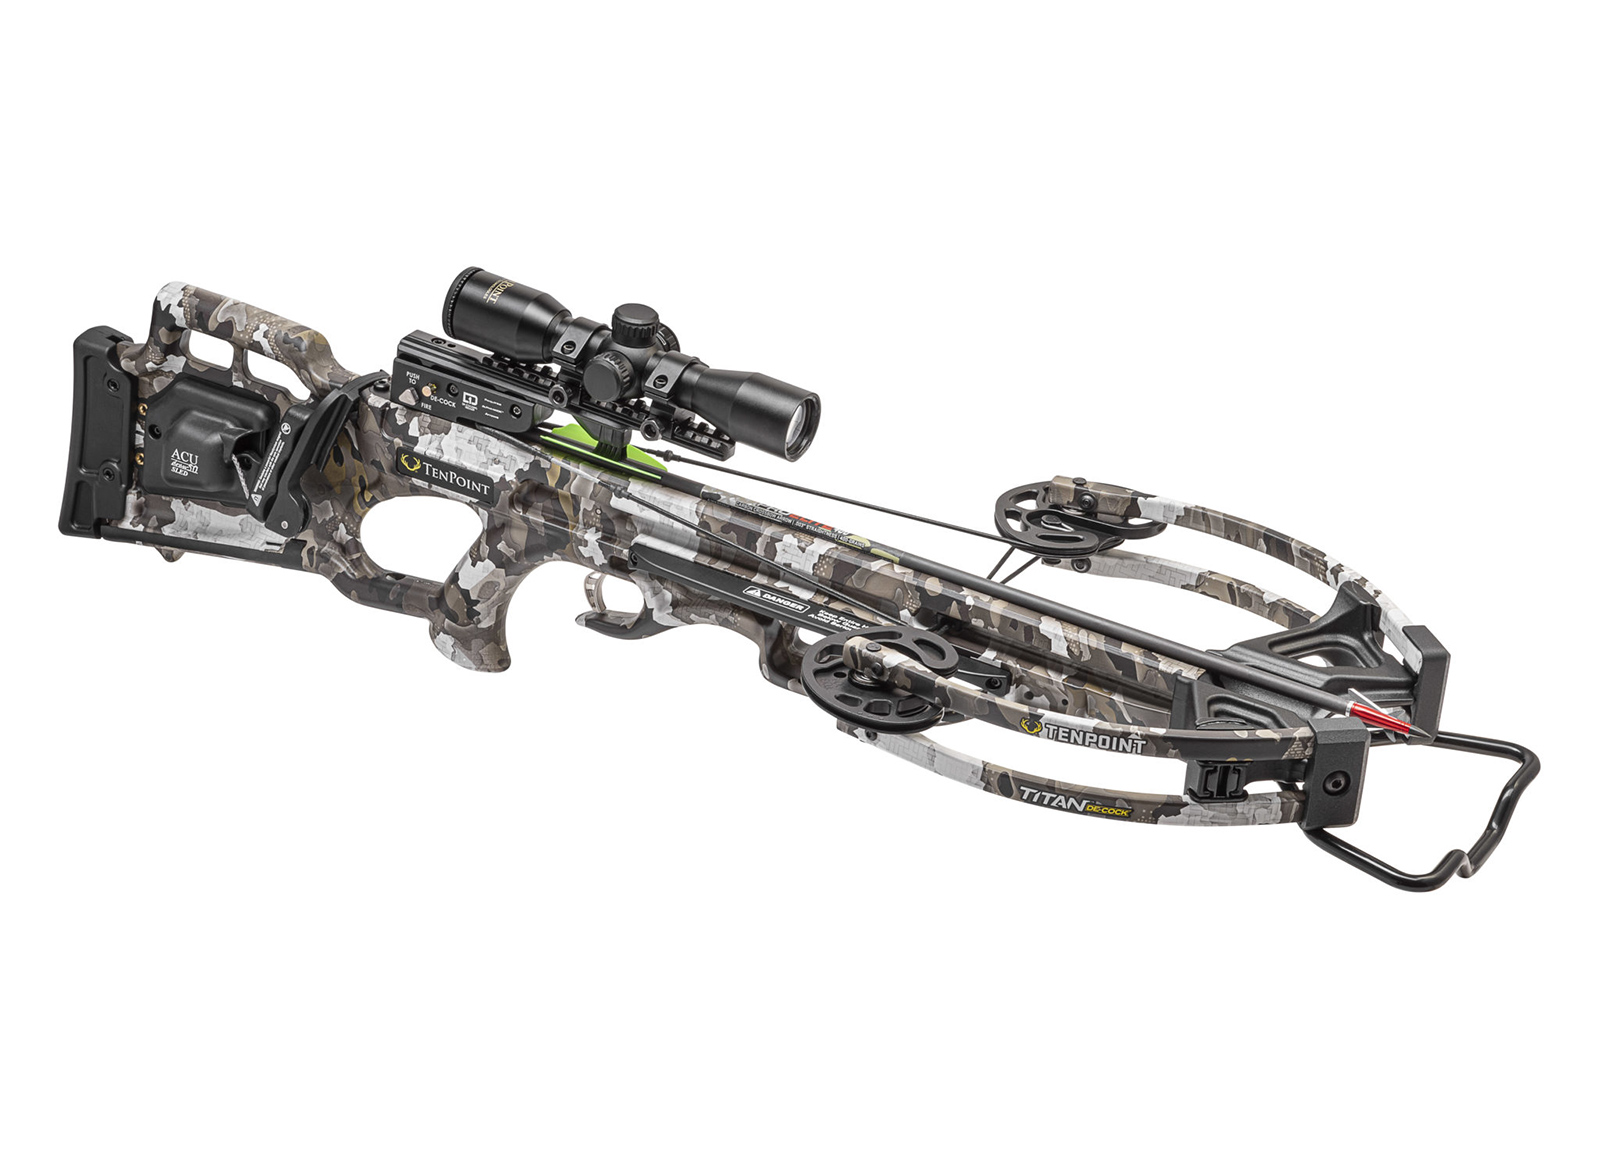 TENPOINT CROSSBOW TITAN DE-COCK, ACUDRAW 50 SLED VEKTRA PACKAGE